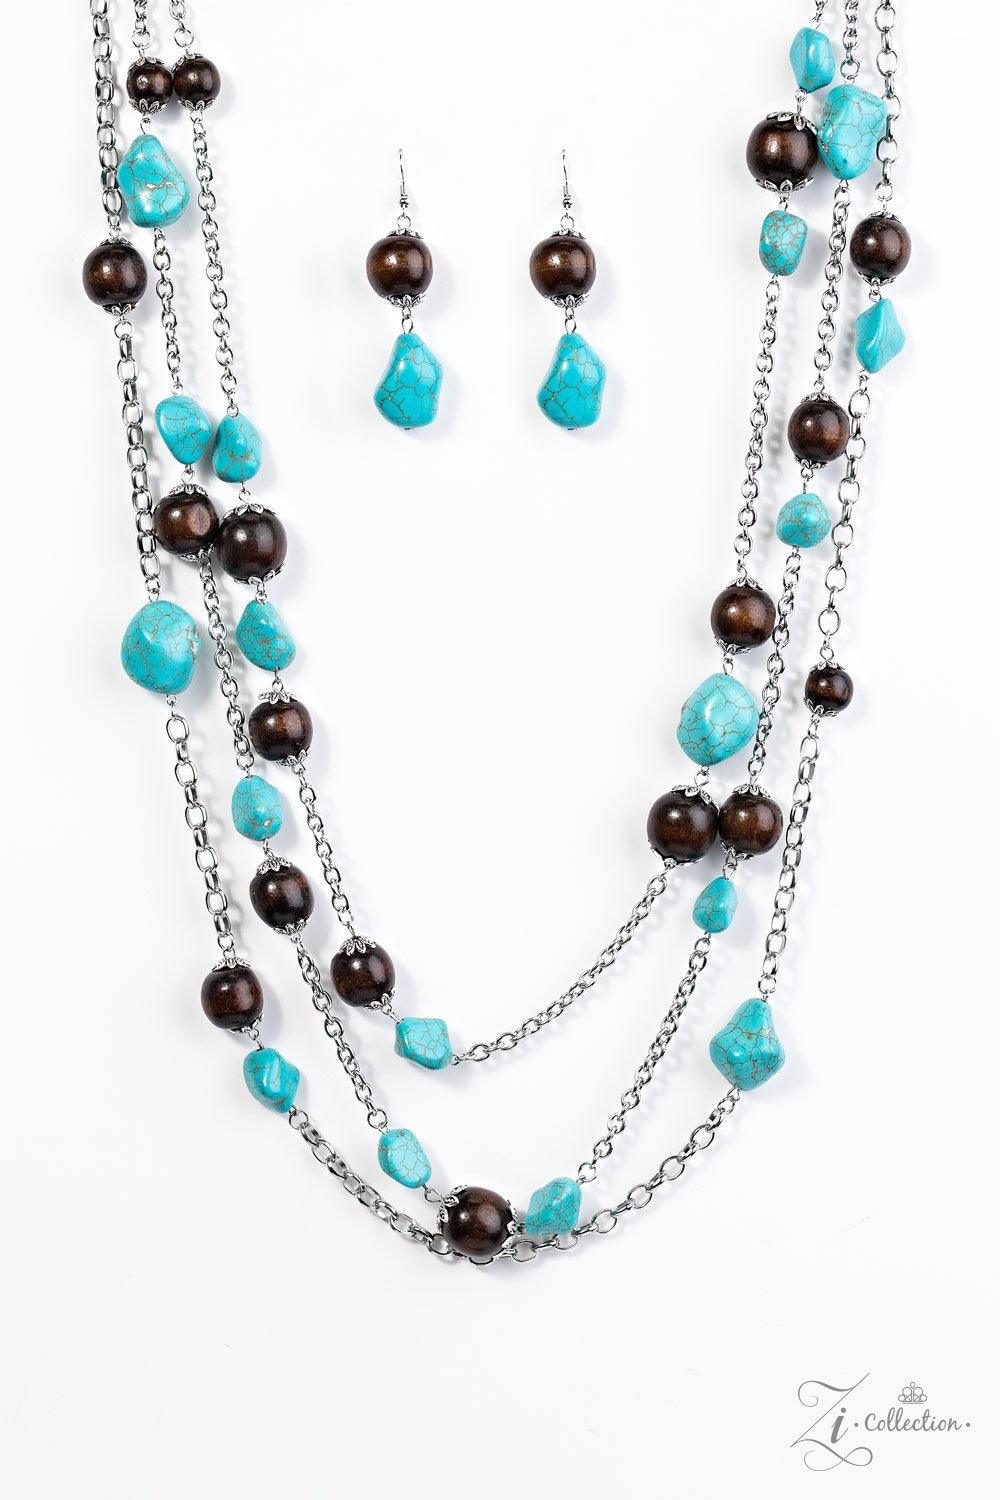 Paparazzi Accessories Groundbreaker Featuring imperfect finishes, refreshing turquoise stones trickle along three shimmery silver chains. Earthy wooden accents are added to the tranquil layers for a natural, artisanal inspired look. Features an adjustable